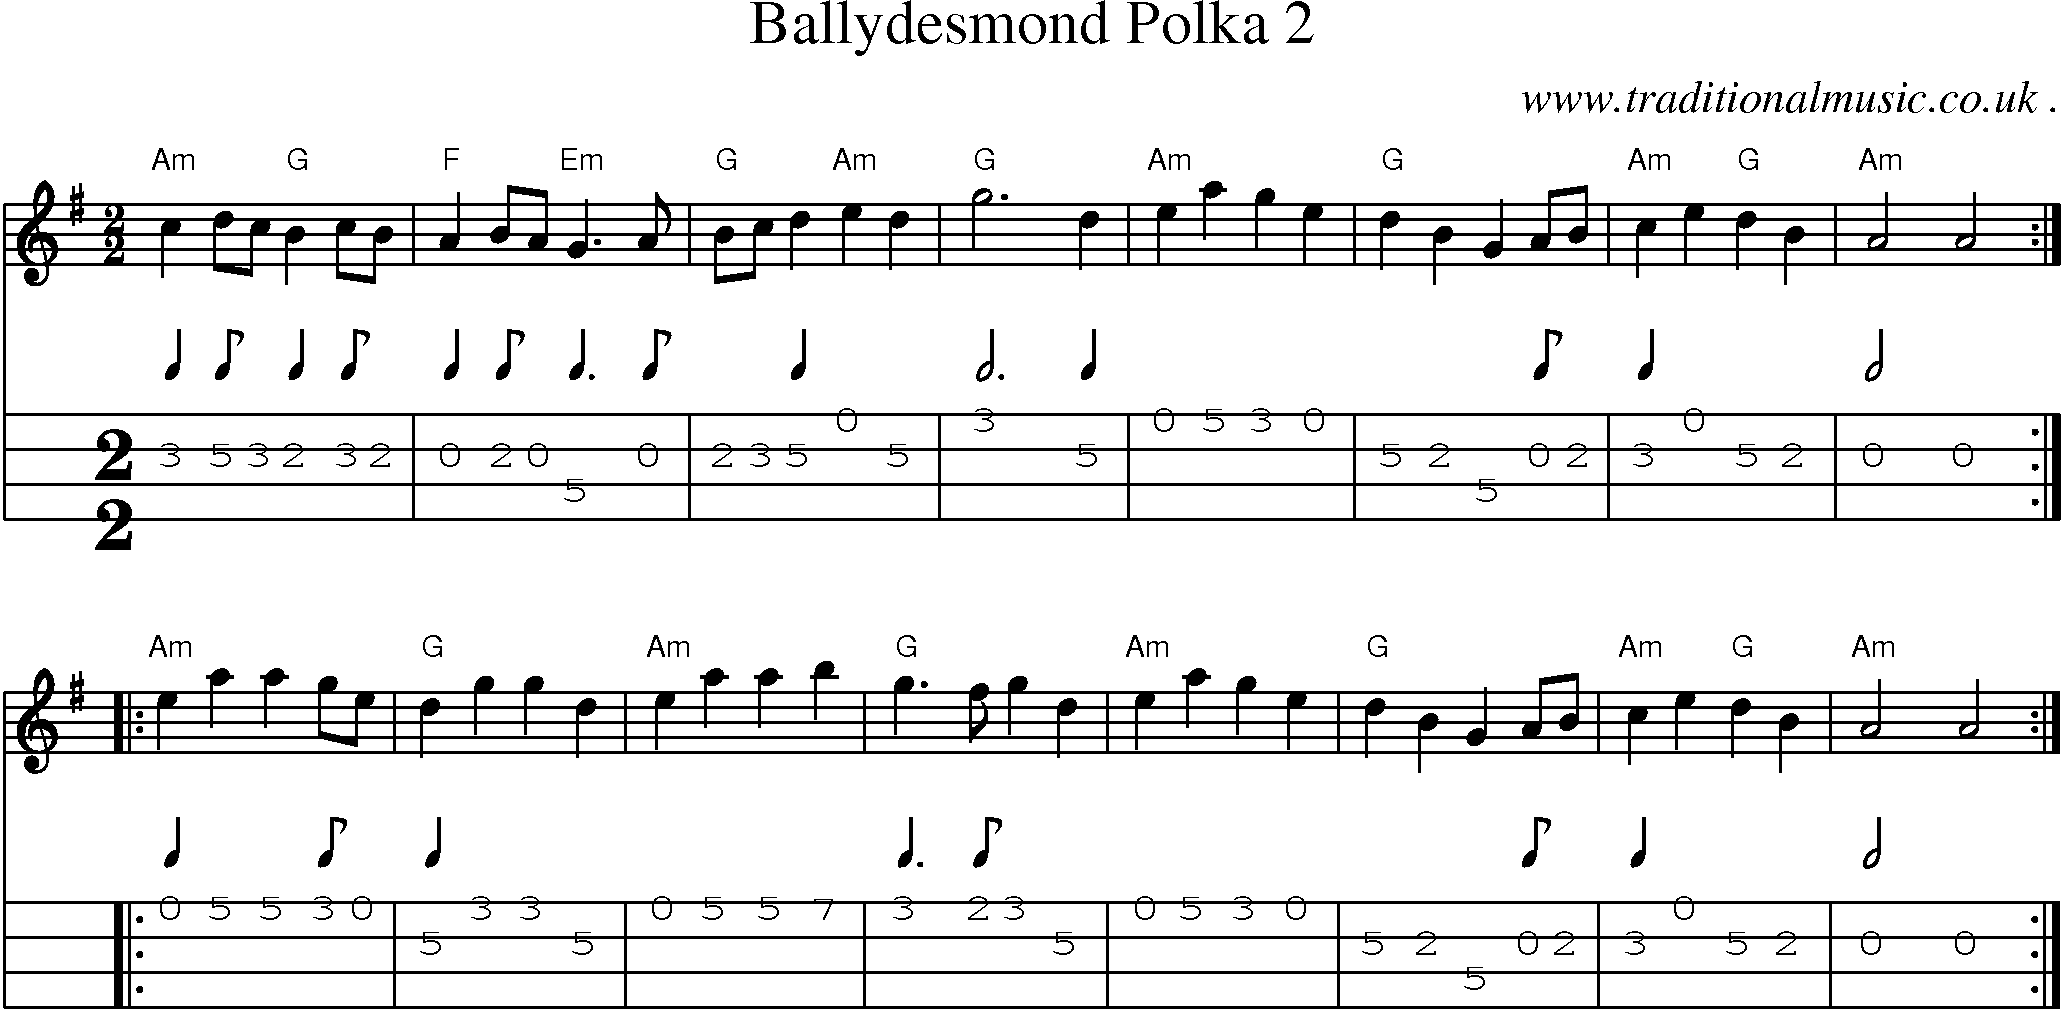 Music Score and Guitar Tabs for Ballydesmond Polka 2